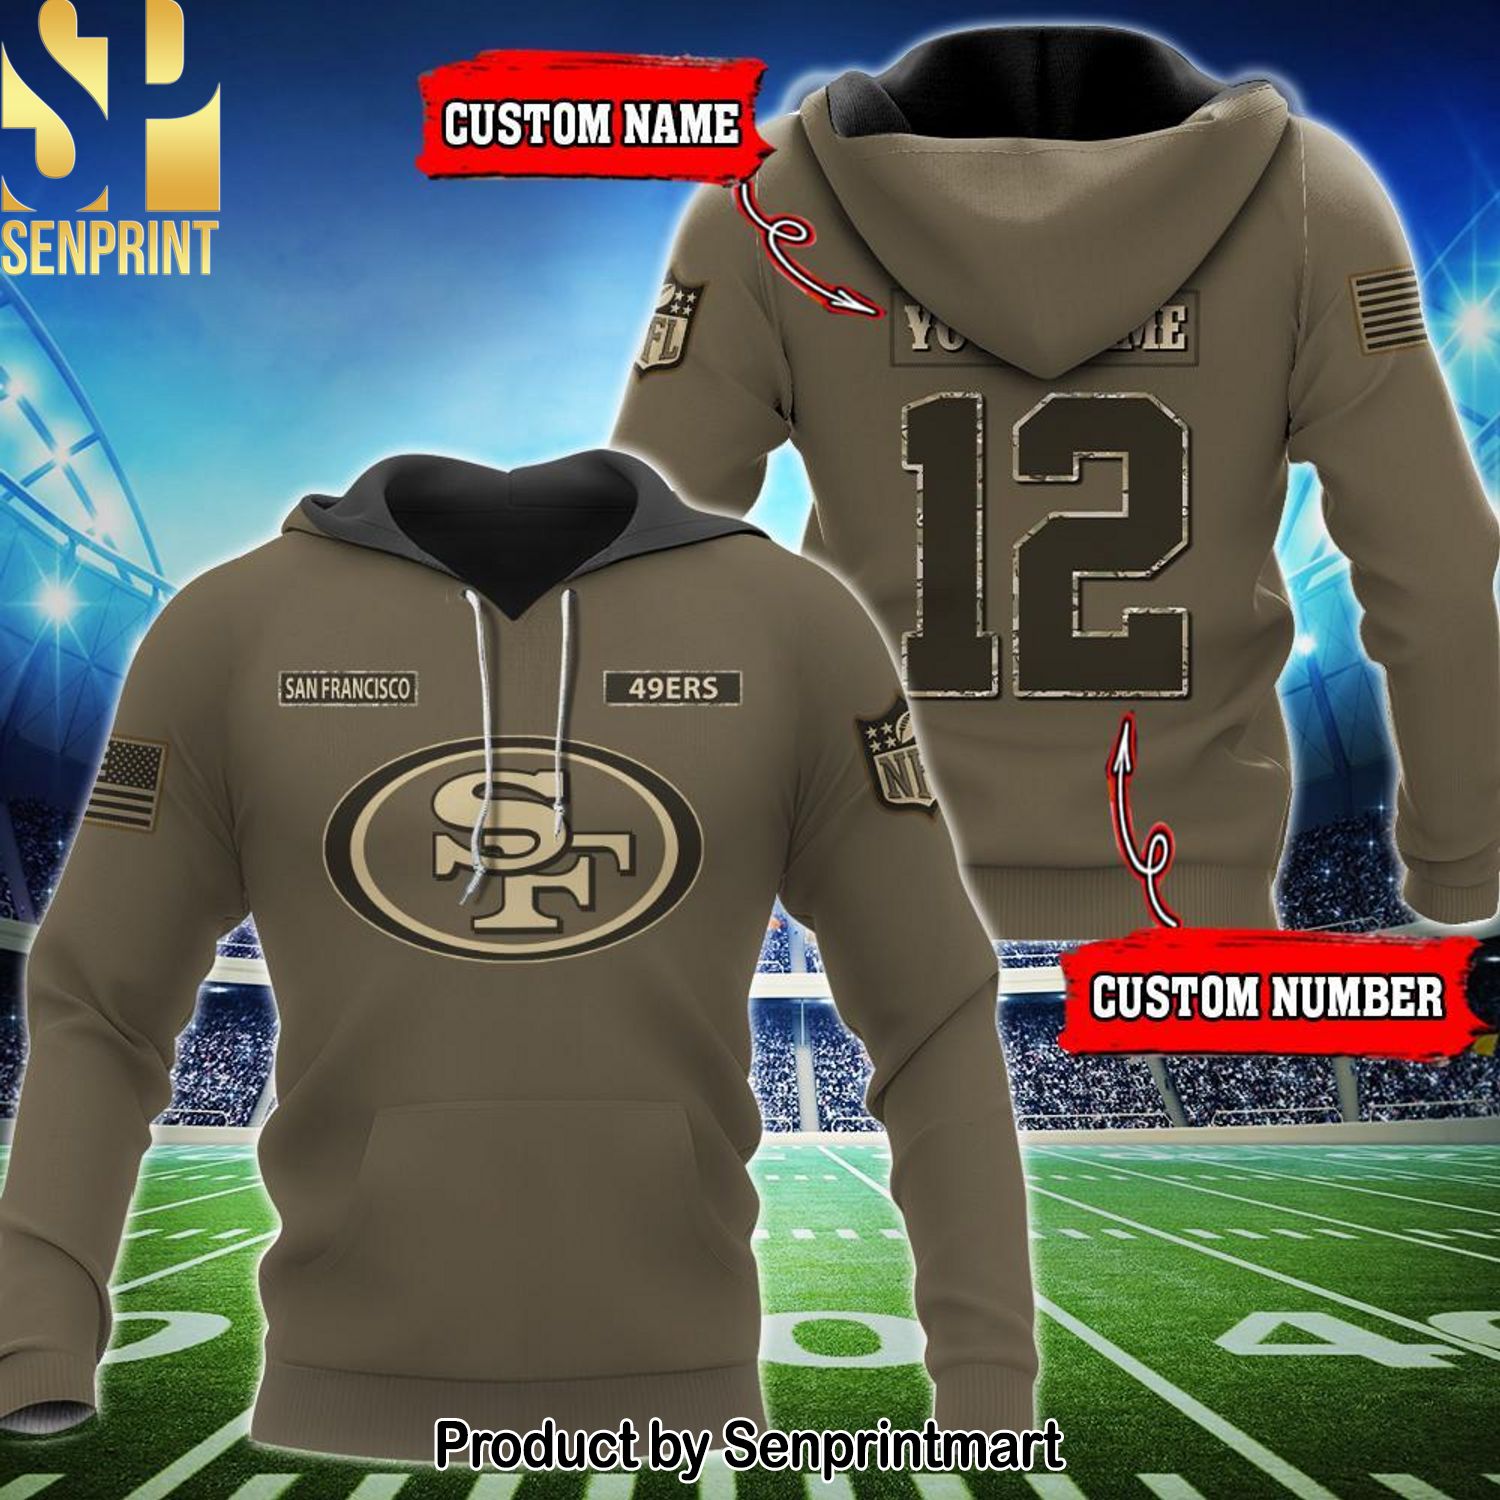 Personalized Your Name And Custom Number NFL San Francisco ers Hot Fashion 3D Shirt